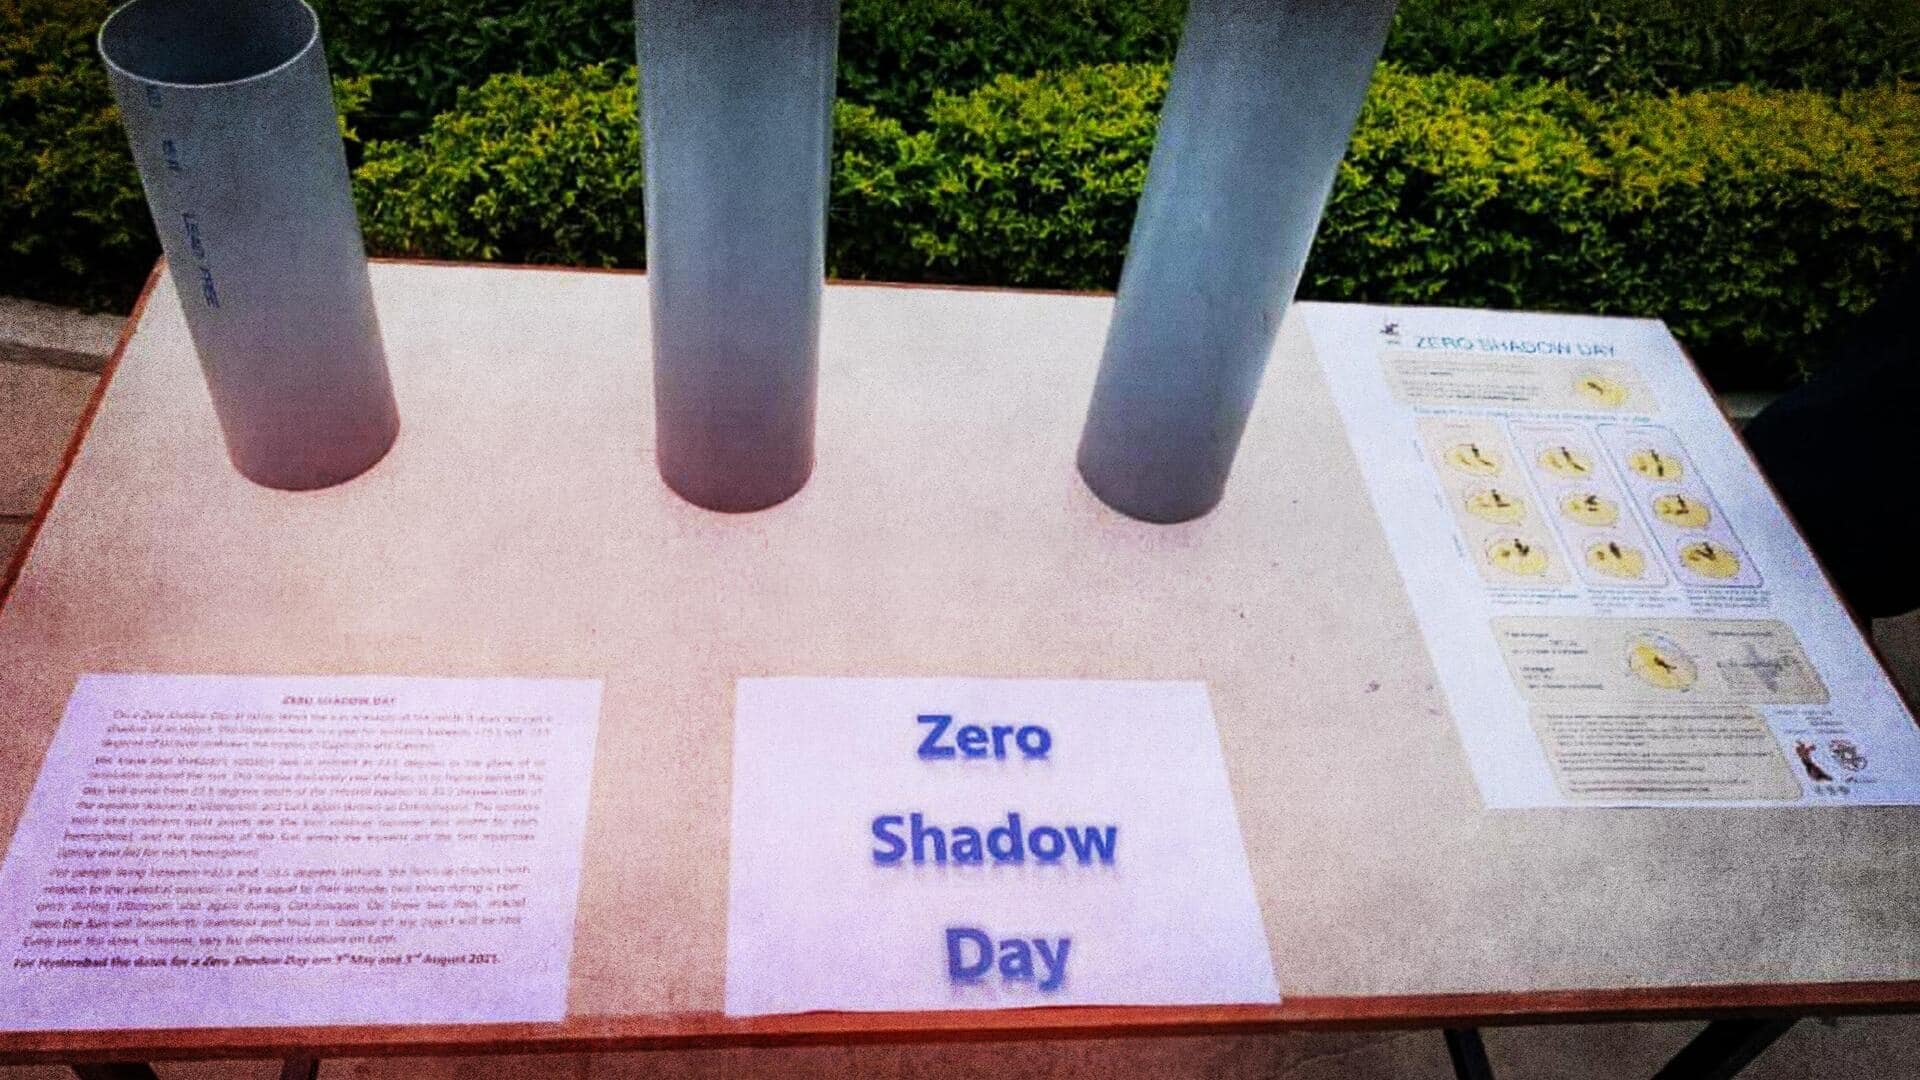 Hyderabad to experience 'Zero Shadow' at 12:23 pm today